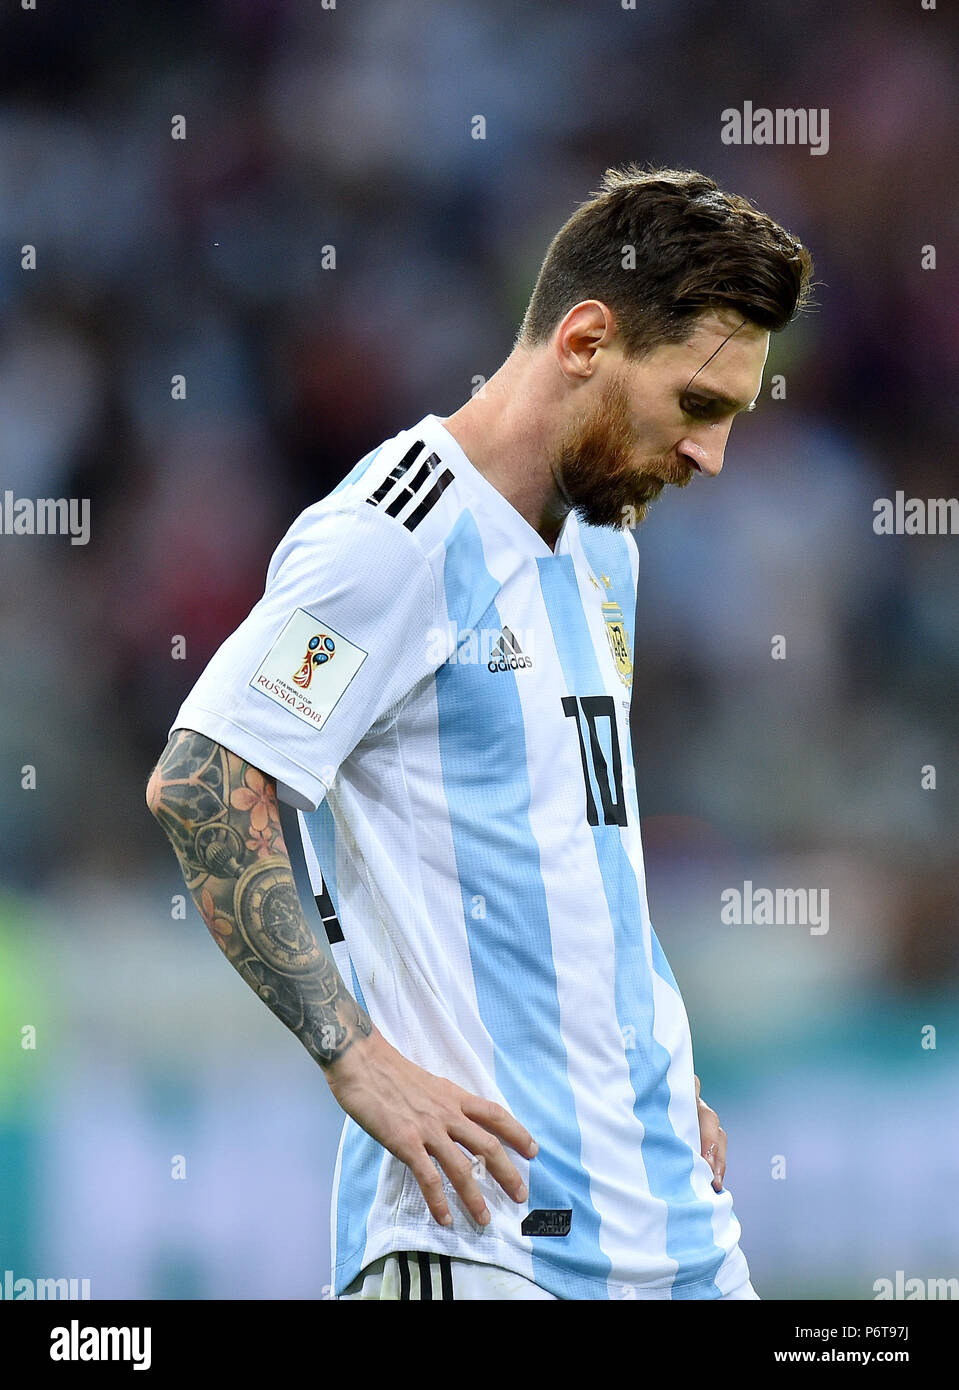 NIZHNIY NOVGOROD, RUSSIA - JUNE 21: Lionel Messi of Argentina looks on after argentina conceived second goal during the 2018 FIFA World Cup Russia group D match between Argentina and Croatia at Nizhniy Novgorod Stadium on June 21, 2018 in Nizhniy Novgorod, Russia. (Photo by Lukasz Laskowski/PressFocus/MB Media) Stock Photo